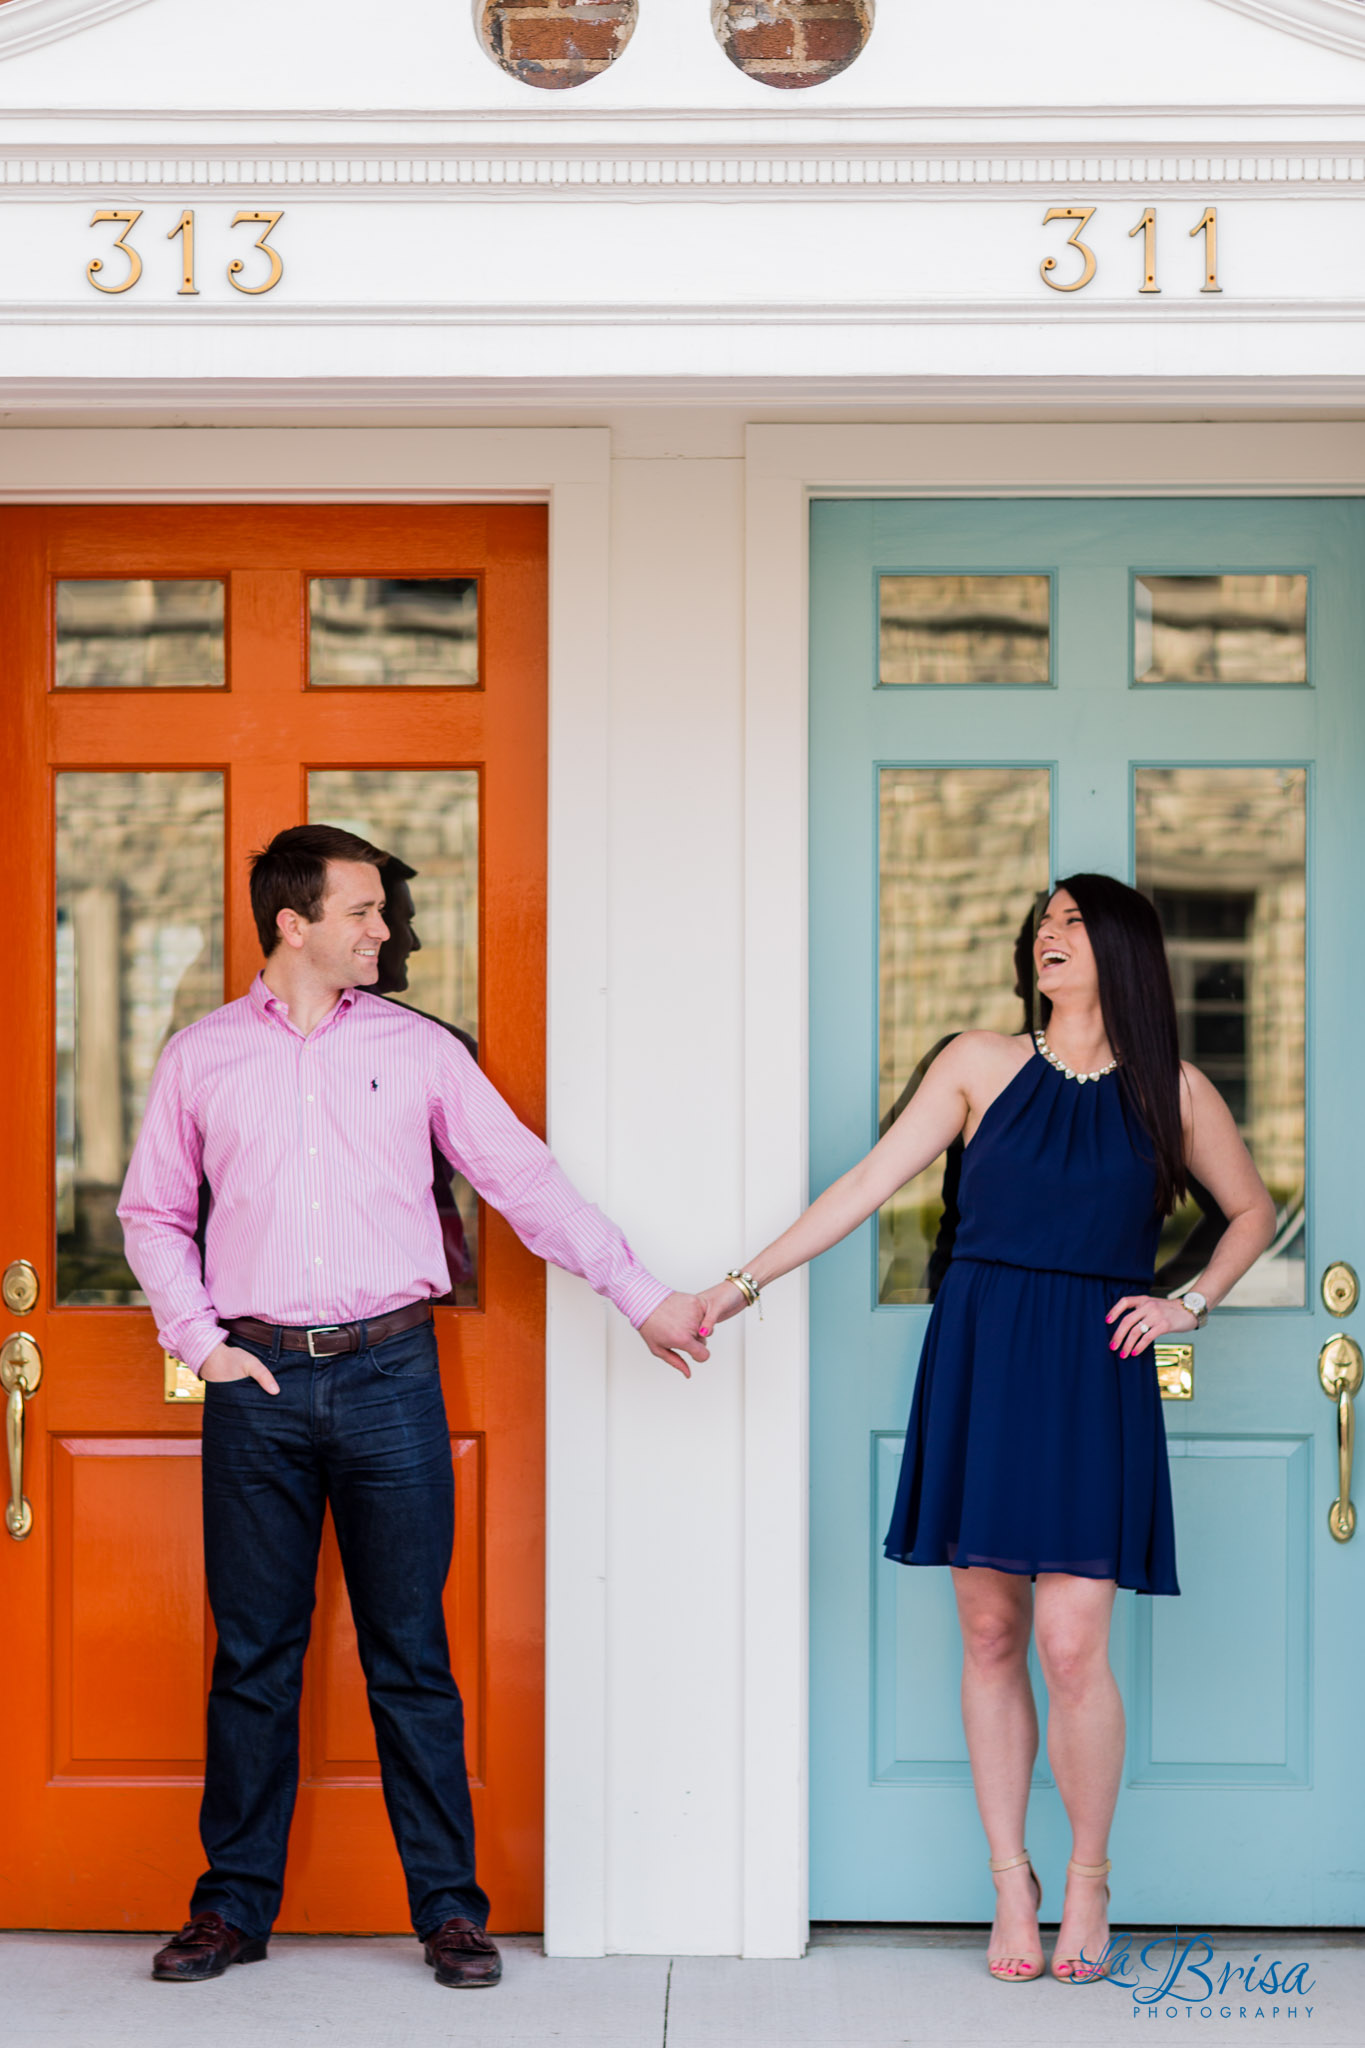 Melissa + JP | Attraction Session | Kansas City, MO | Chris Hsieh